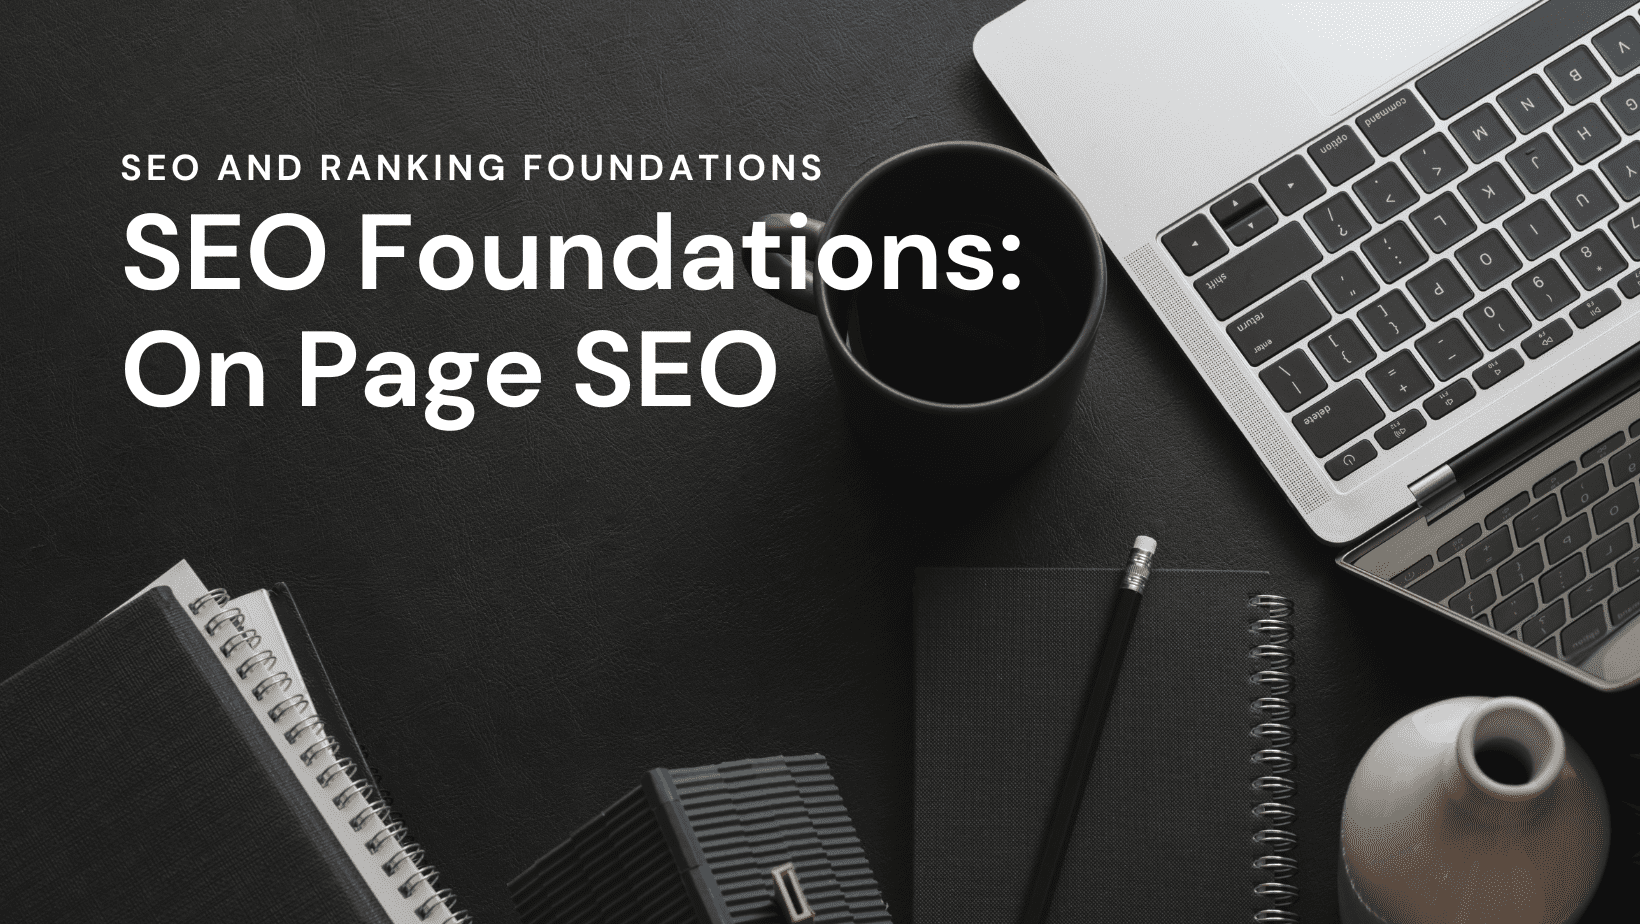 SEO and Ranking Foundations SEO Foundations: On Page SEO